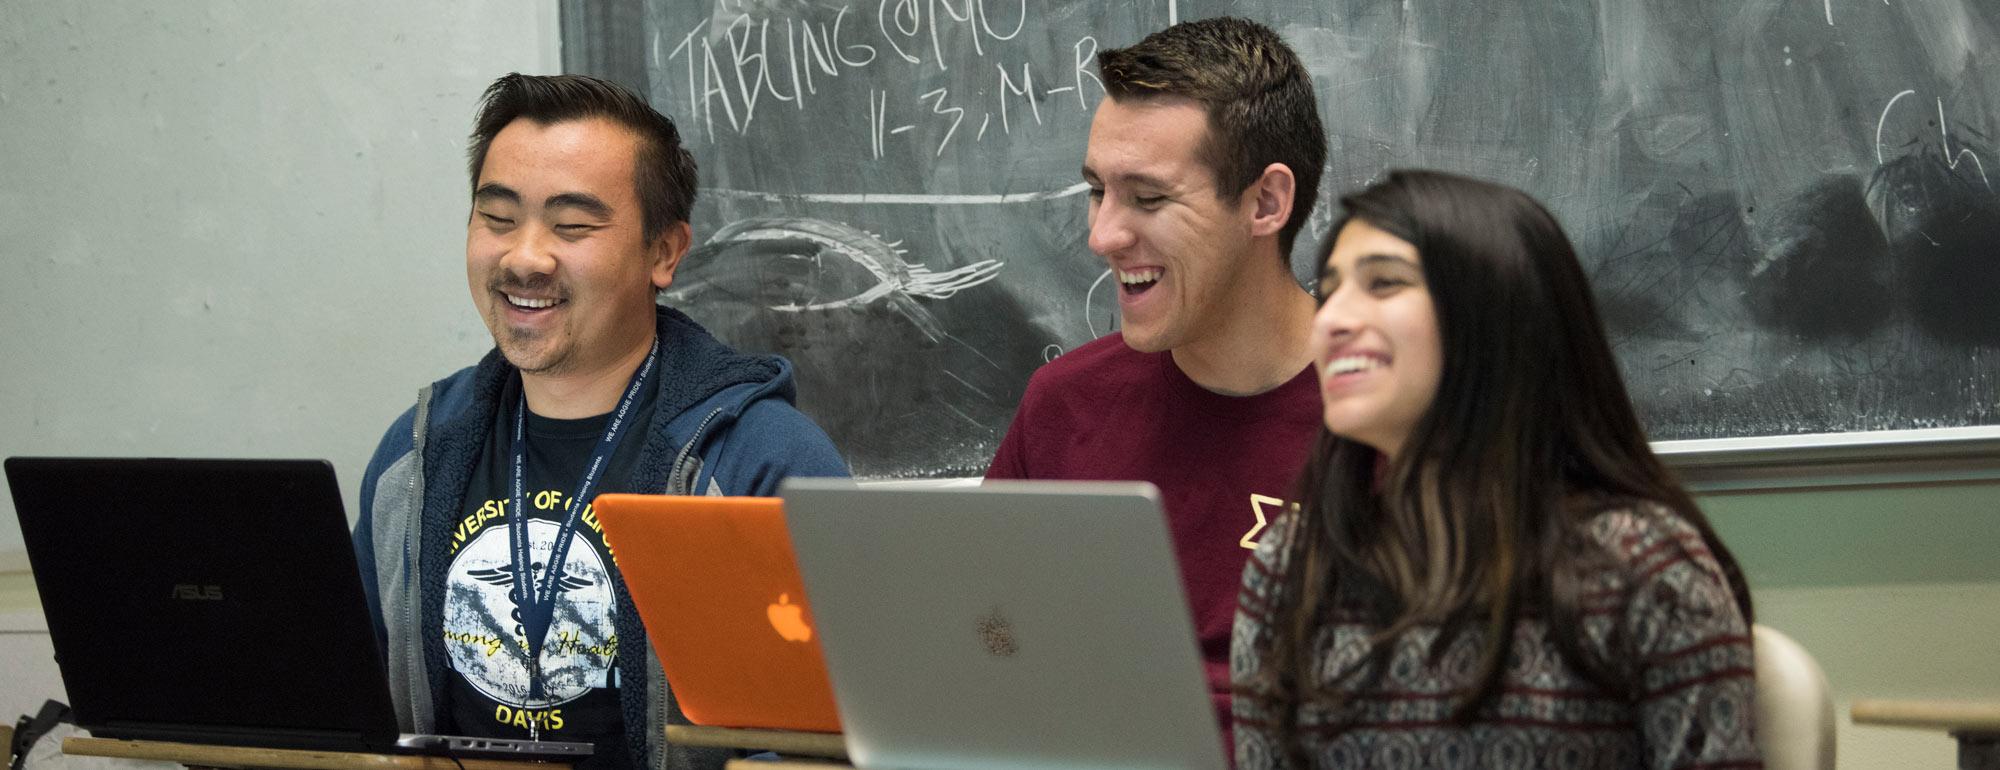 three students sitting in front of a chalkboard with laptops laughing in a classroom